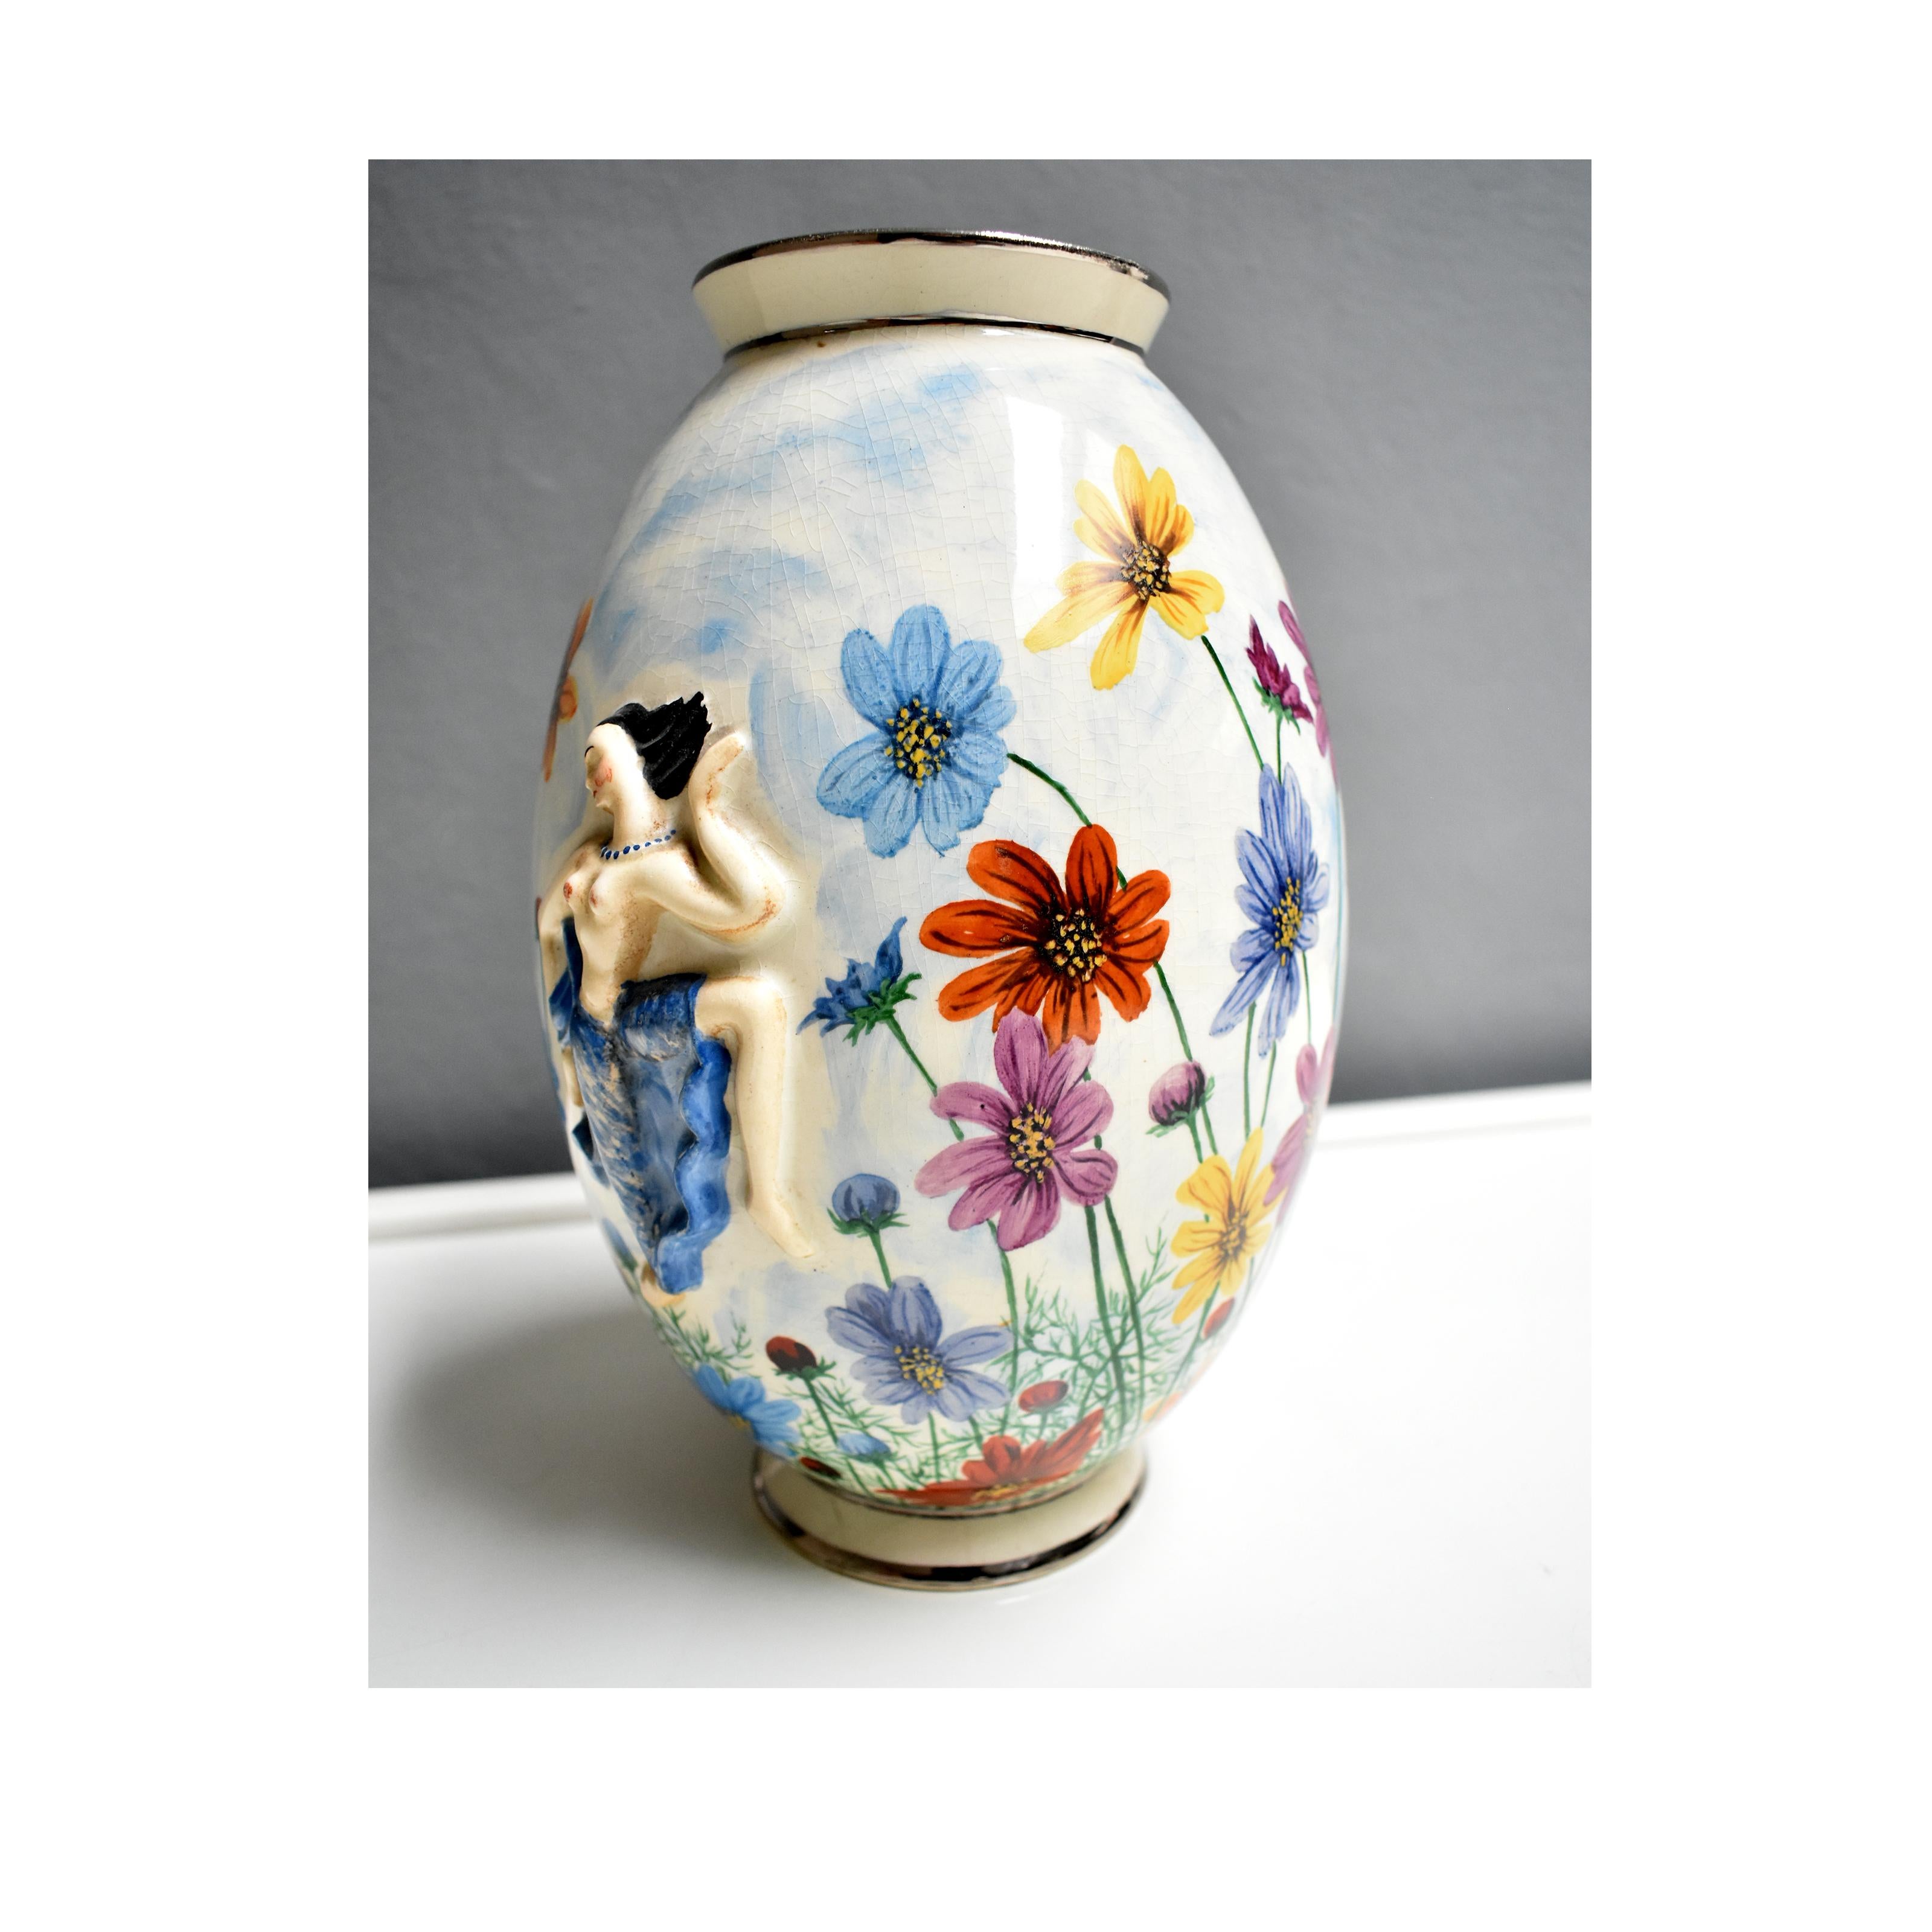 Vintage white ceramic vase with hand made floral painting.
On the vase there are figures in thickness.
The vase dates back to the 1950s and was produced in Italy.
On the bottom you can see the signature and a numbering.
A small repair was made